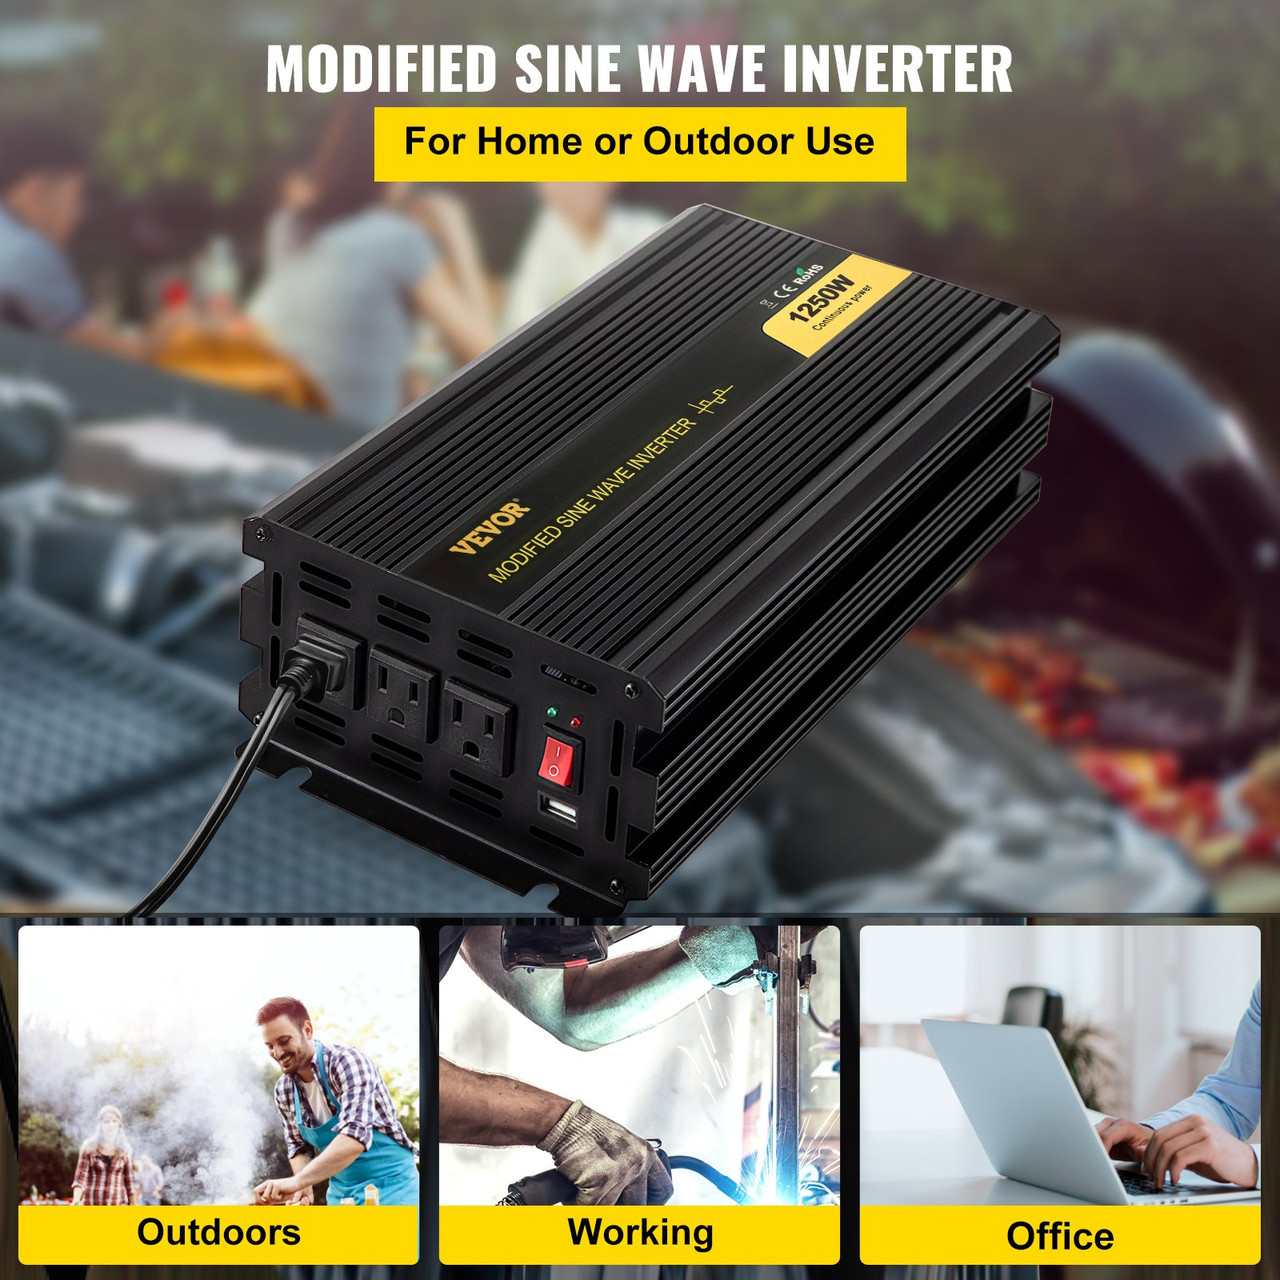 Power Inverter, 1250W Modified Sine Wave Inverter, DC 12V to AC 120V Car Converter, with LCD Remote Controller, LED Indicator, AC Outlets Inverter for Truck RV Car Boat Travel Camping Emergency